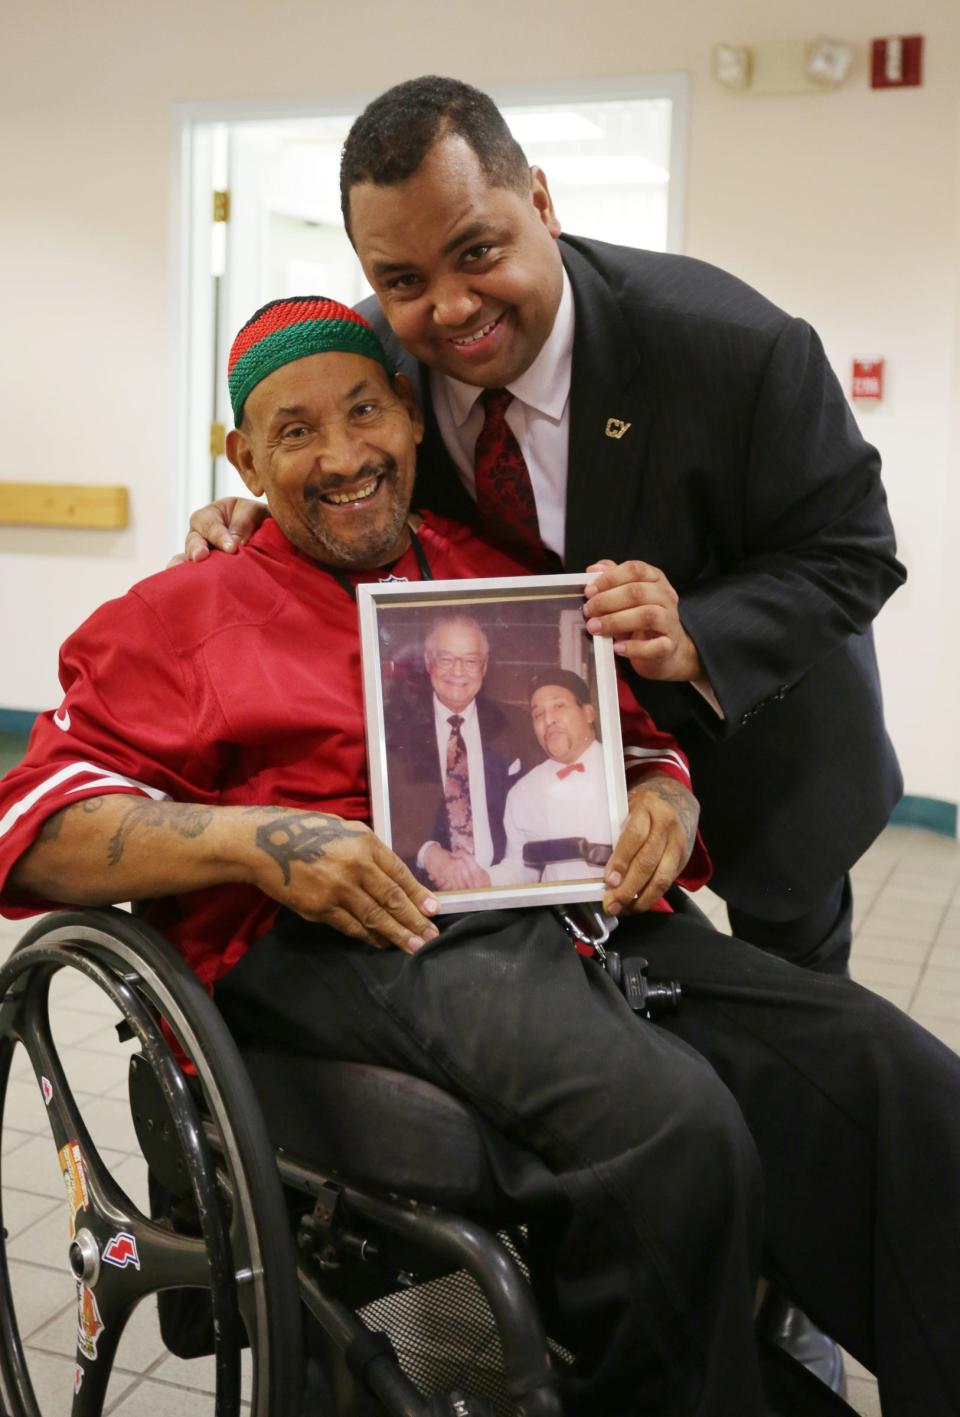 Lawrence Dilworth, 73, gets his photo taken with Sen. Coleman Young II holding a photograph of himself with the senator's father, former Detroit mayor Coleman Young, at Eden Manor, a senior citizen housing development during a campaign stop in Detroit on Oct. 30, 2017.